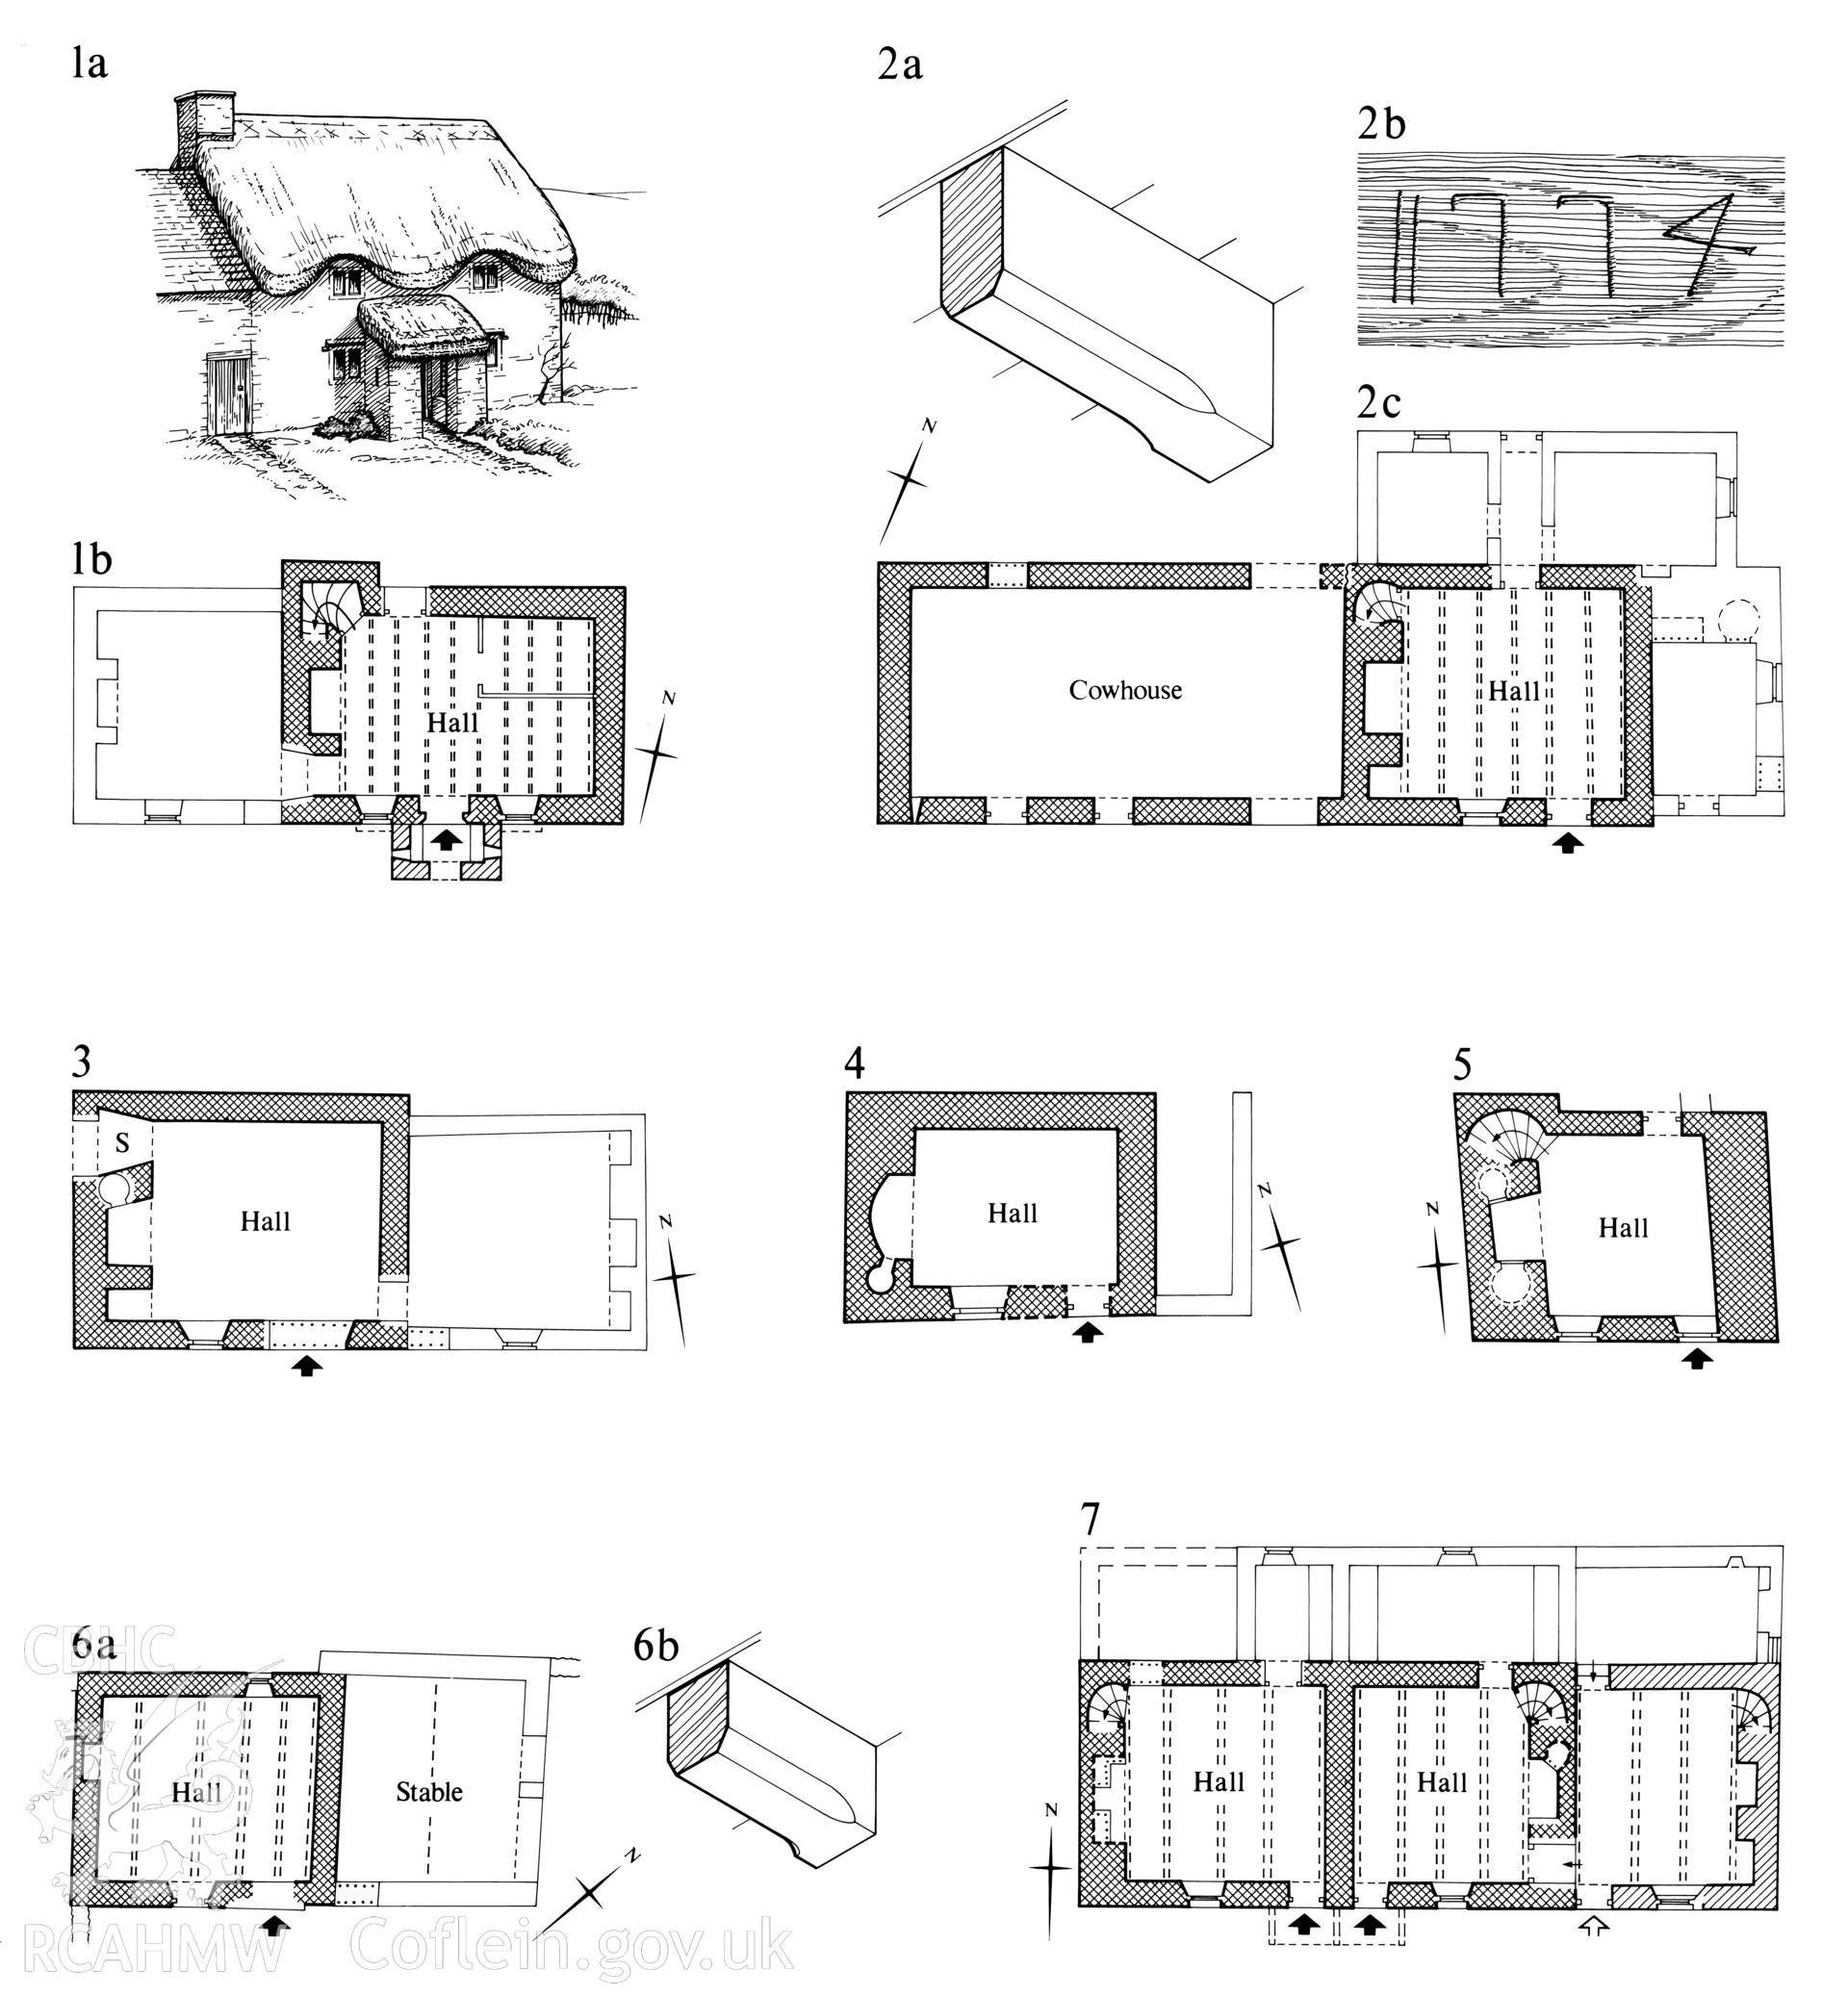 Digital image of measured drawings showing single-unit, direct-entry houses - Vale and Blaenau as published in RCAHMW Inventory : Glamorgan Volume IV: Domestic Architecture from the Reformation to the Industrial Revolution. Part II Farmhouses and Cottages, date of publication 1988.